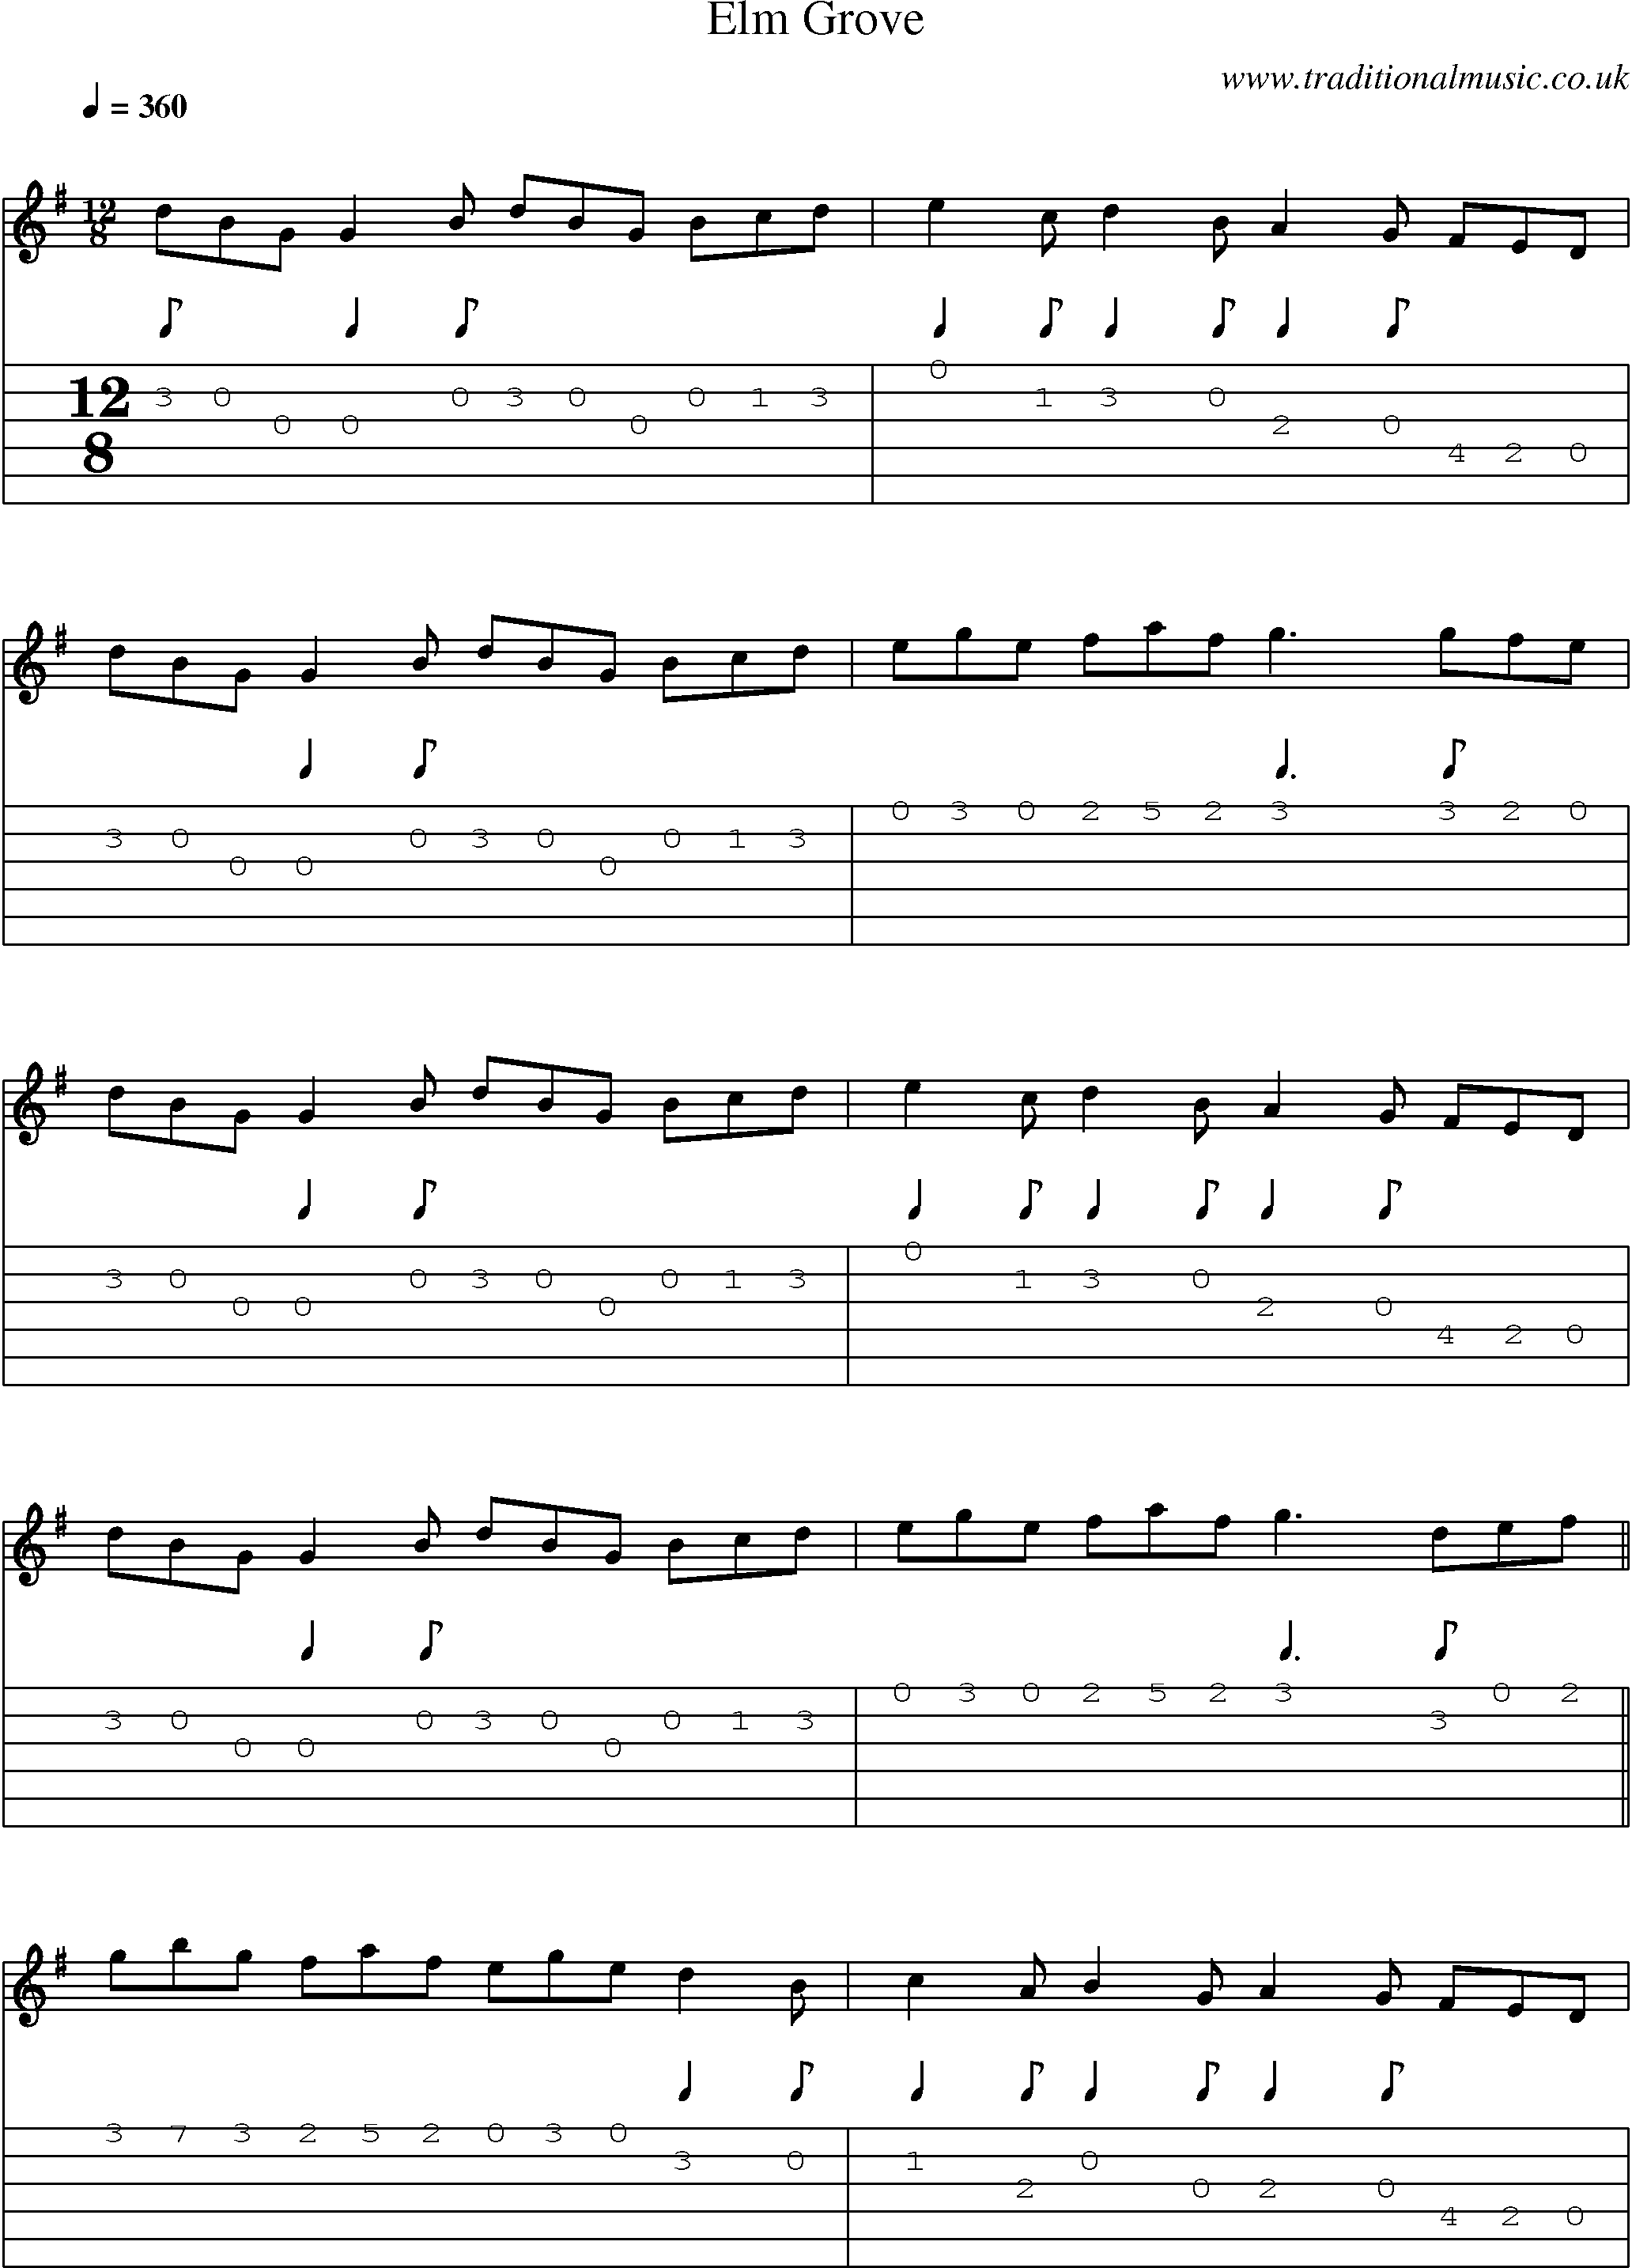 Music Score and Guitar Tabs for Elm Grove